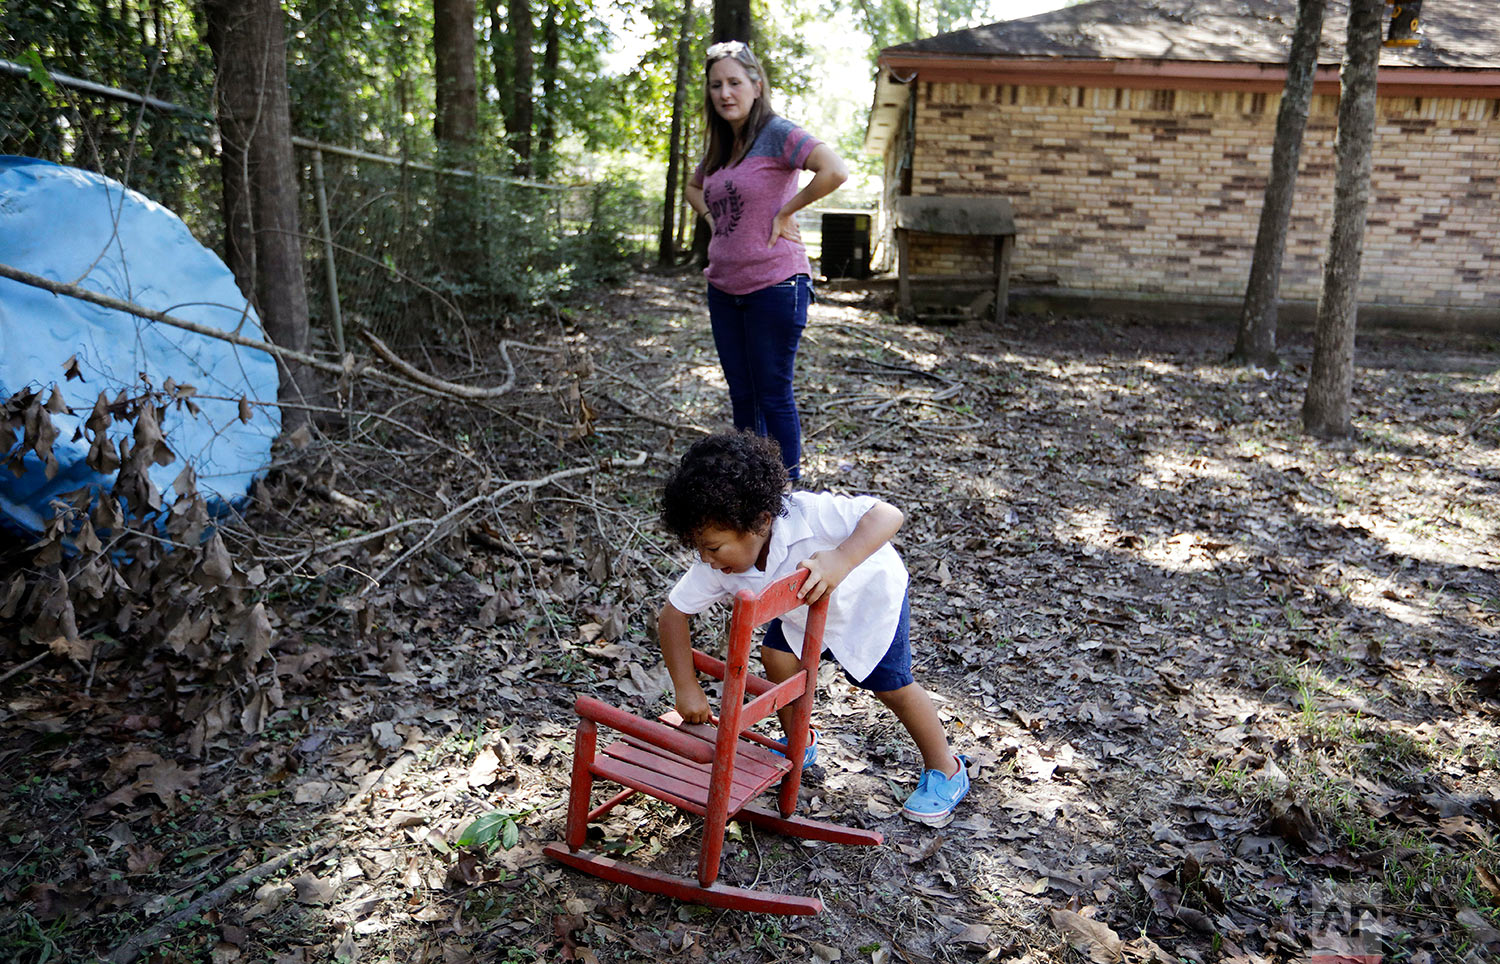  Angela Lopez, watches as her grandson, Carter Gale, 2, cleans dirt off his chair in Beaumont, Texas, Tuesday, Sept. 26, 2017. He found it in the backyard, carried by water from inside their home during Hurricane Harvey flooding. Most of her family, 